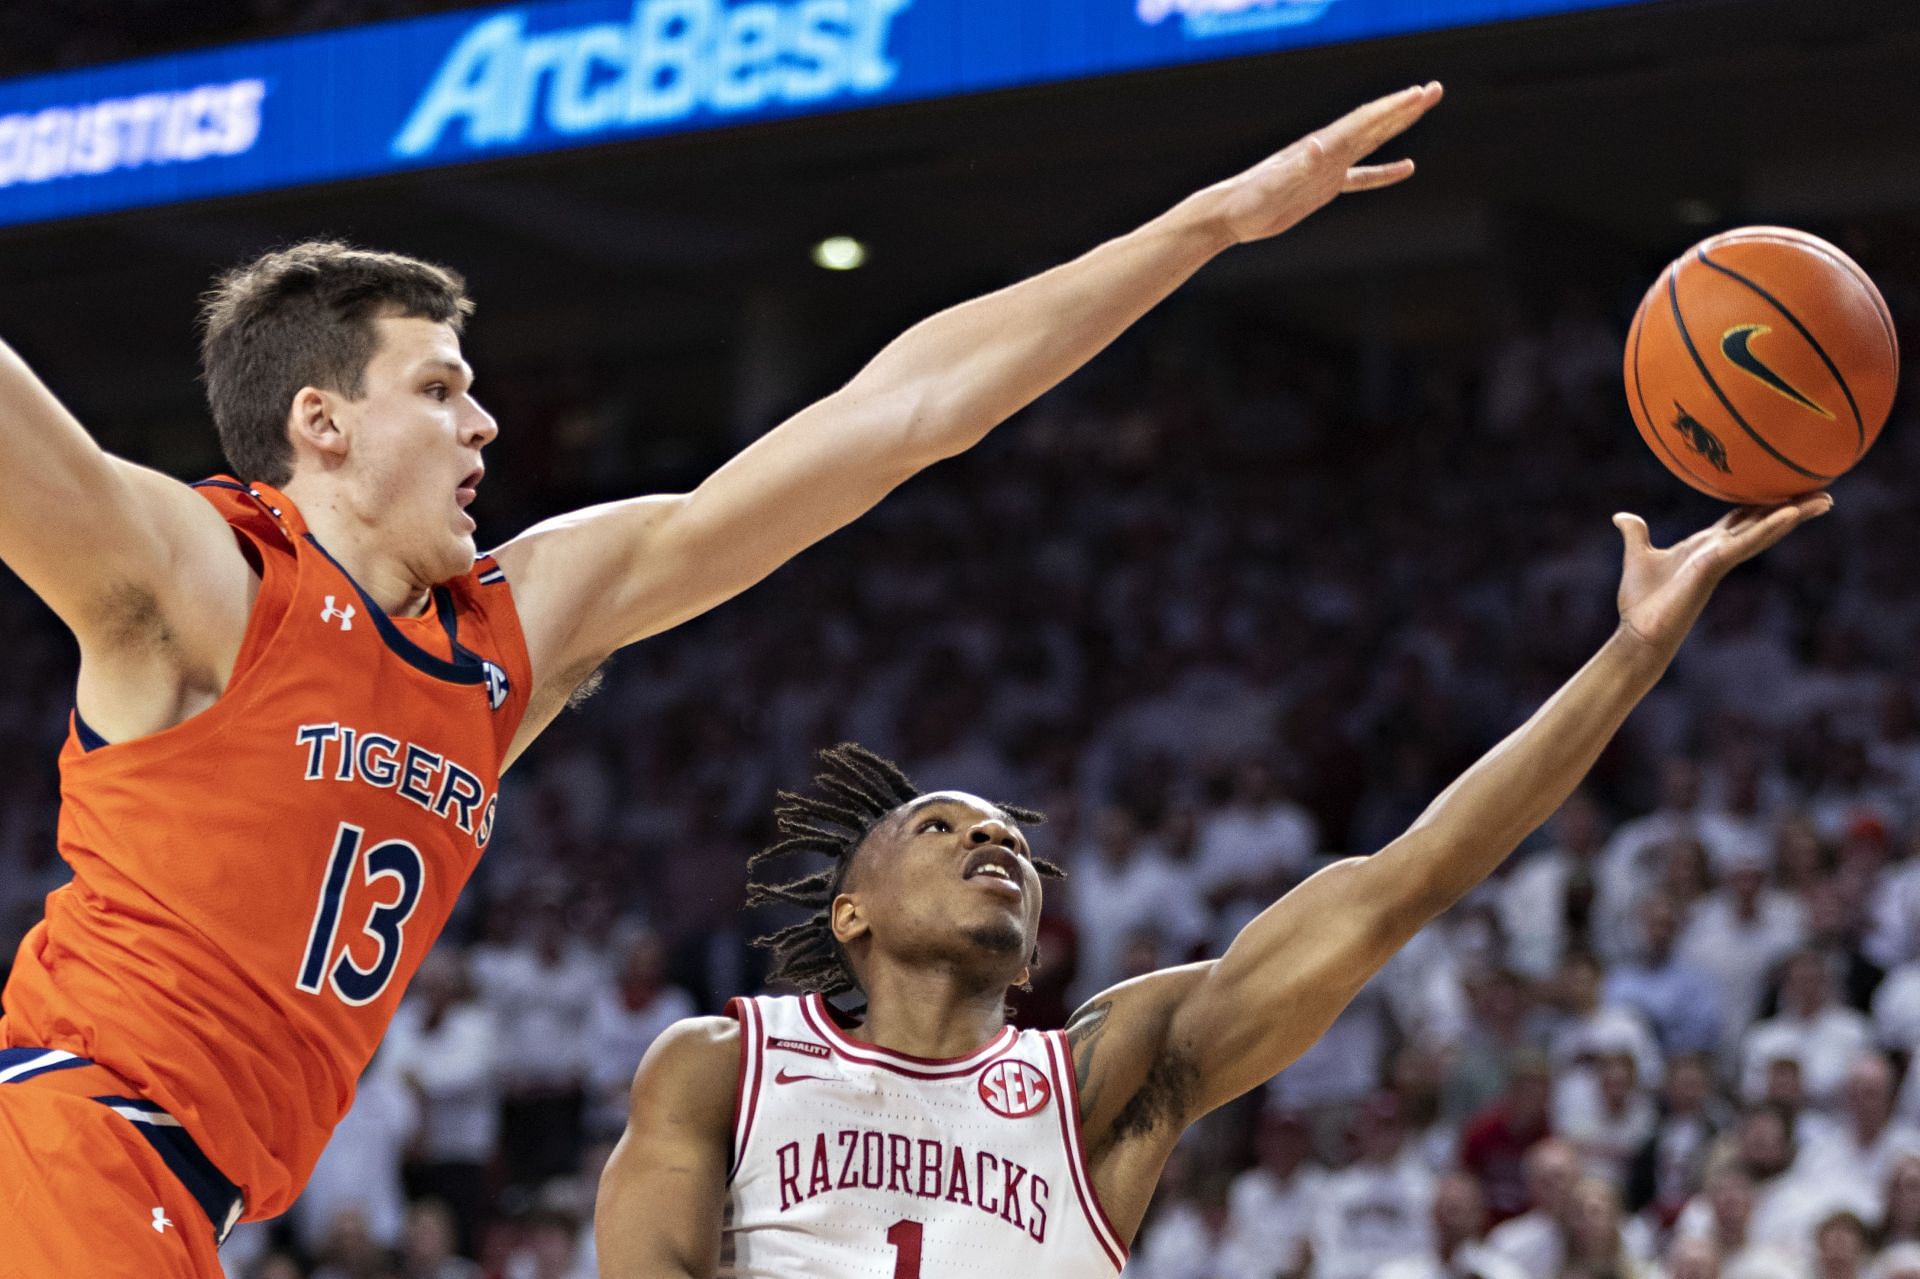 Walker Kessler aims to lead the Auburn Tigers defensively during a run at a national championship.